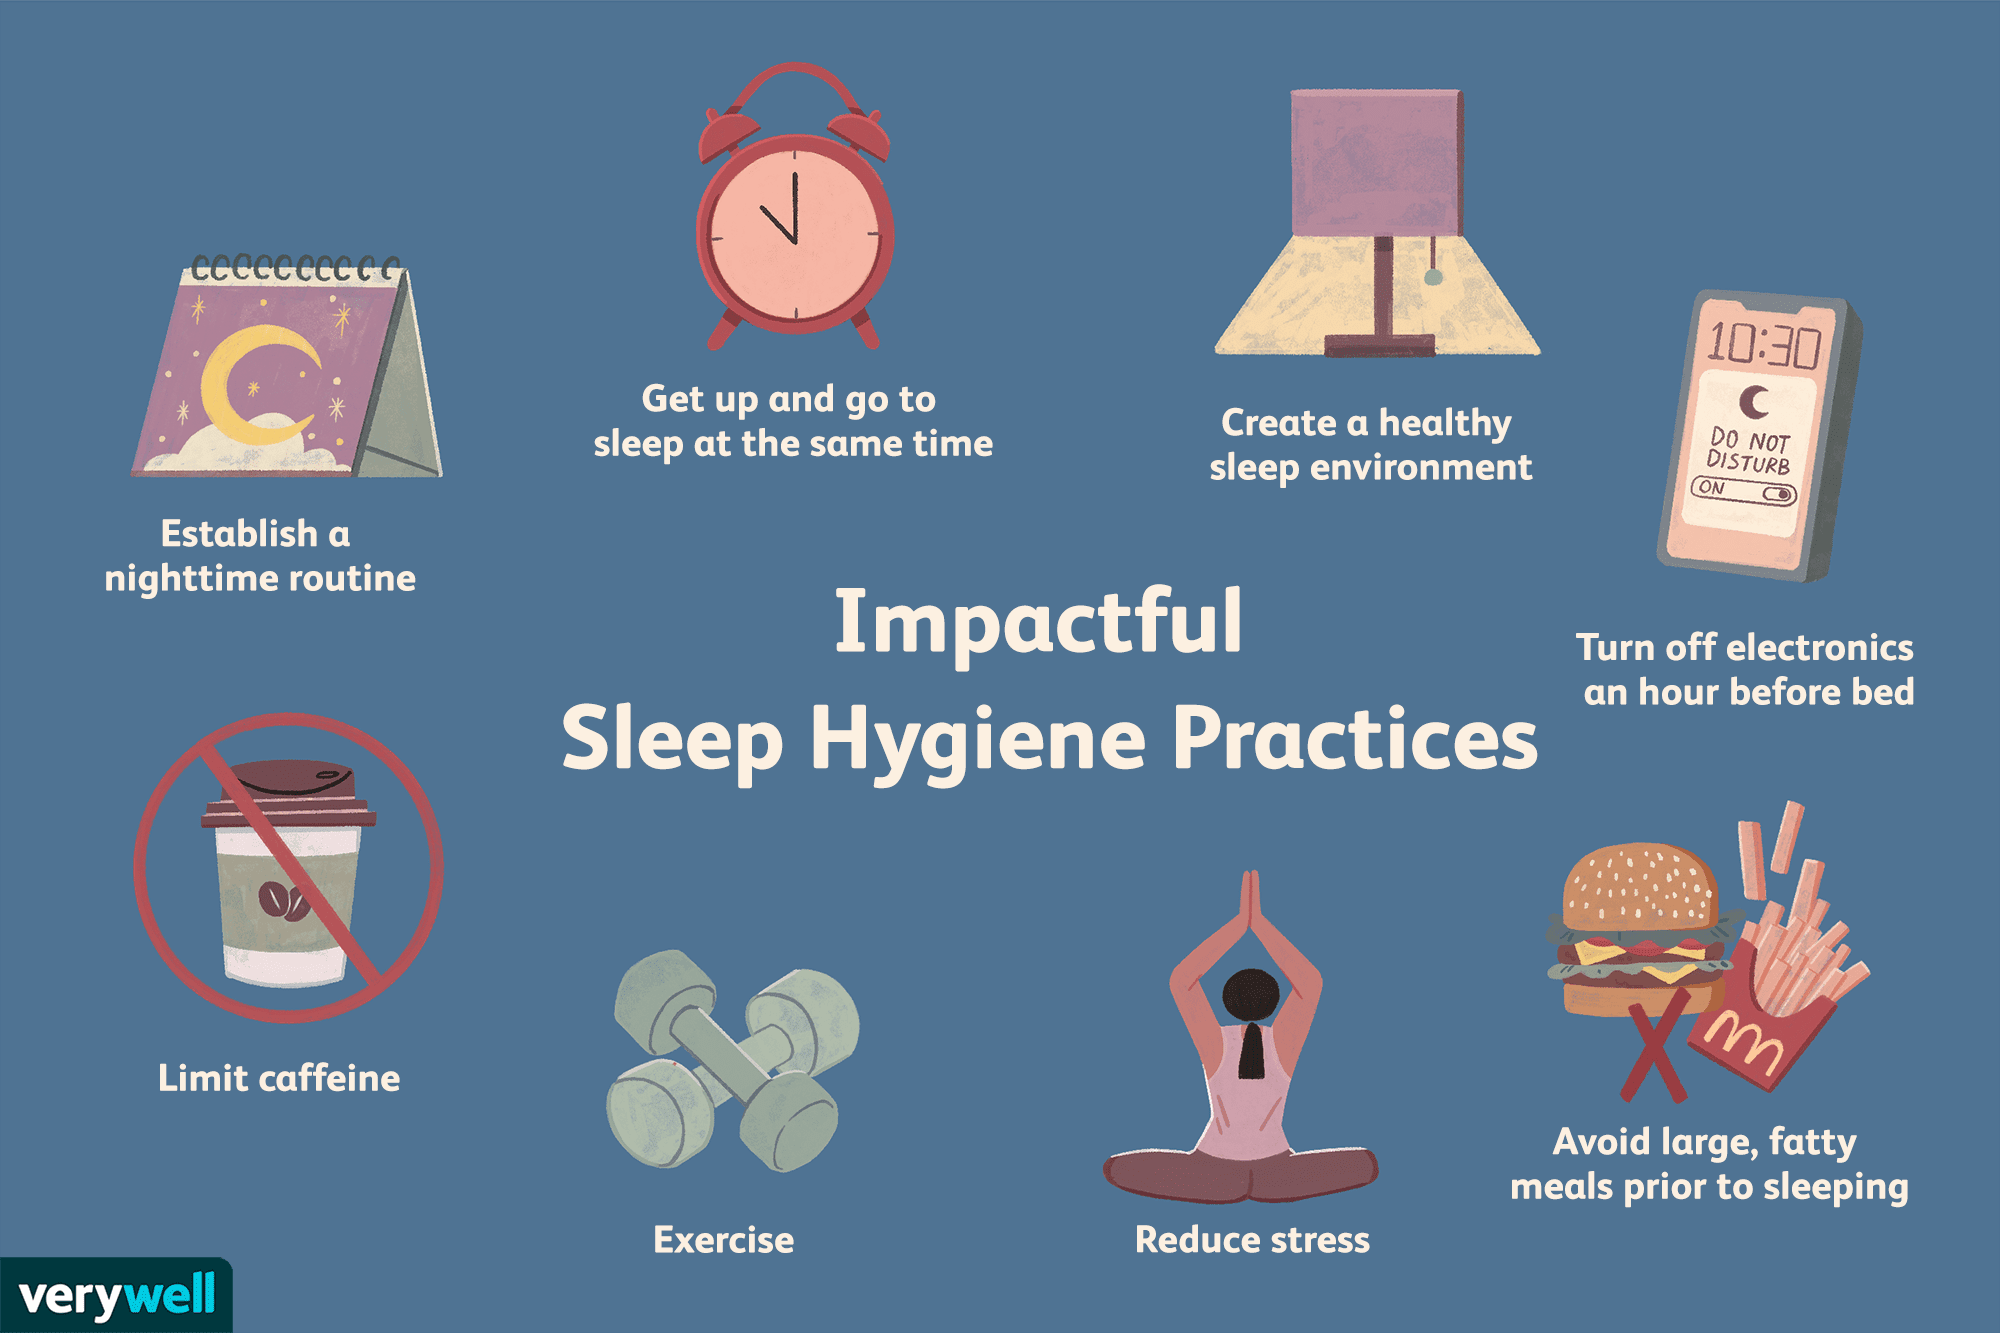 Can sleep hygiene practices help with insomnia?